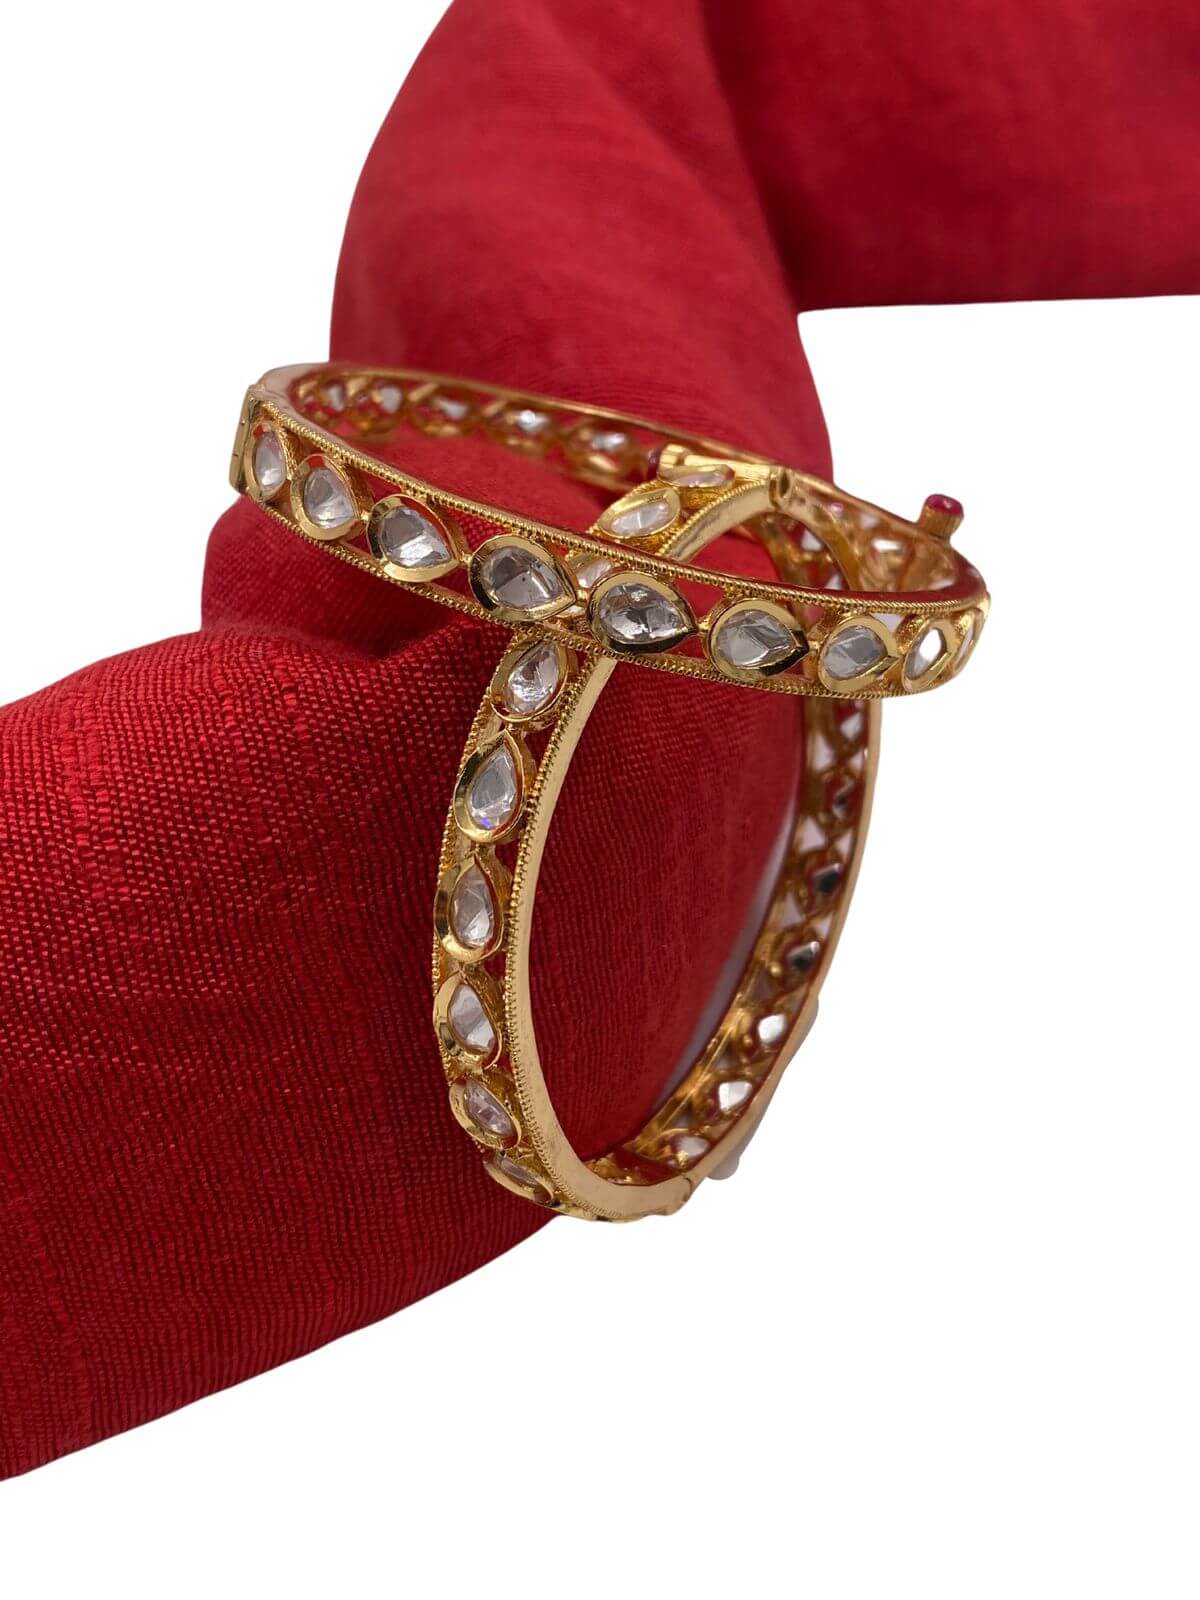 Traditional gold-plated artificial pear shape Thin Polki Bangles 